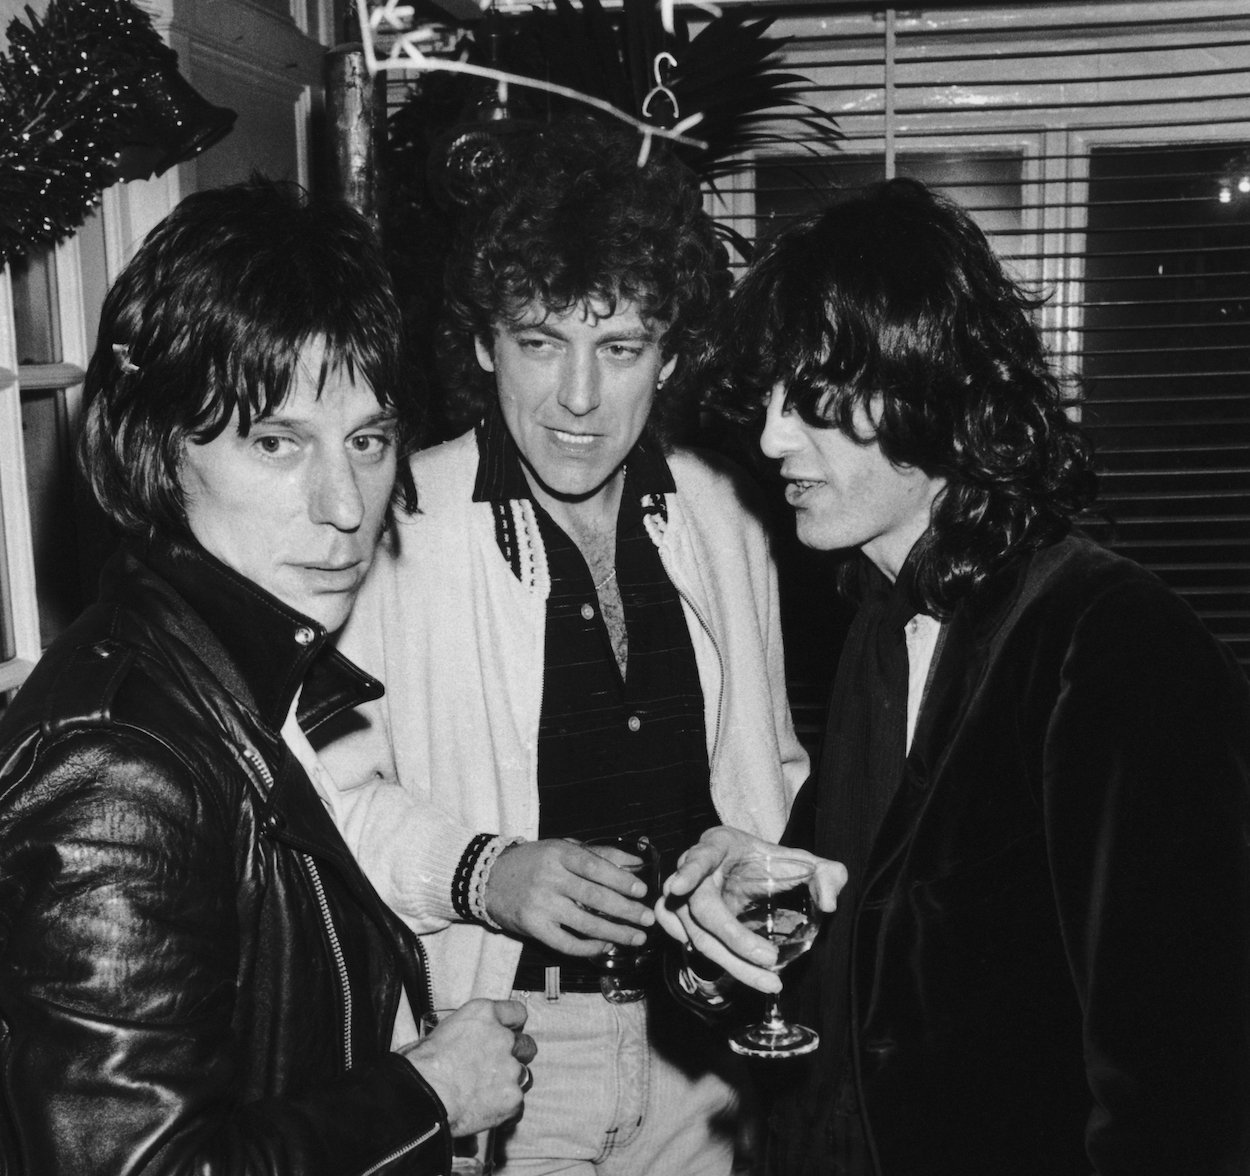 Jeff Beck (from left) and Led Zeppelin's Robert Plant and Jimmy Page at an event in 1983.